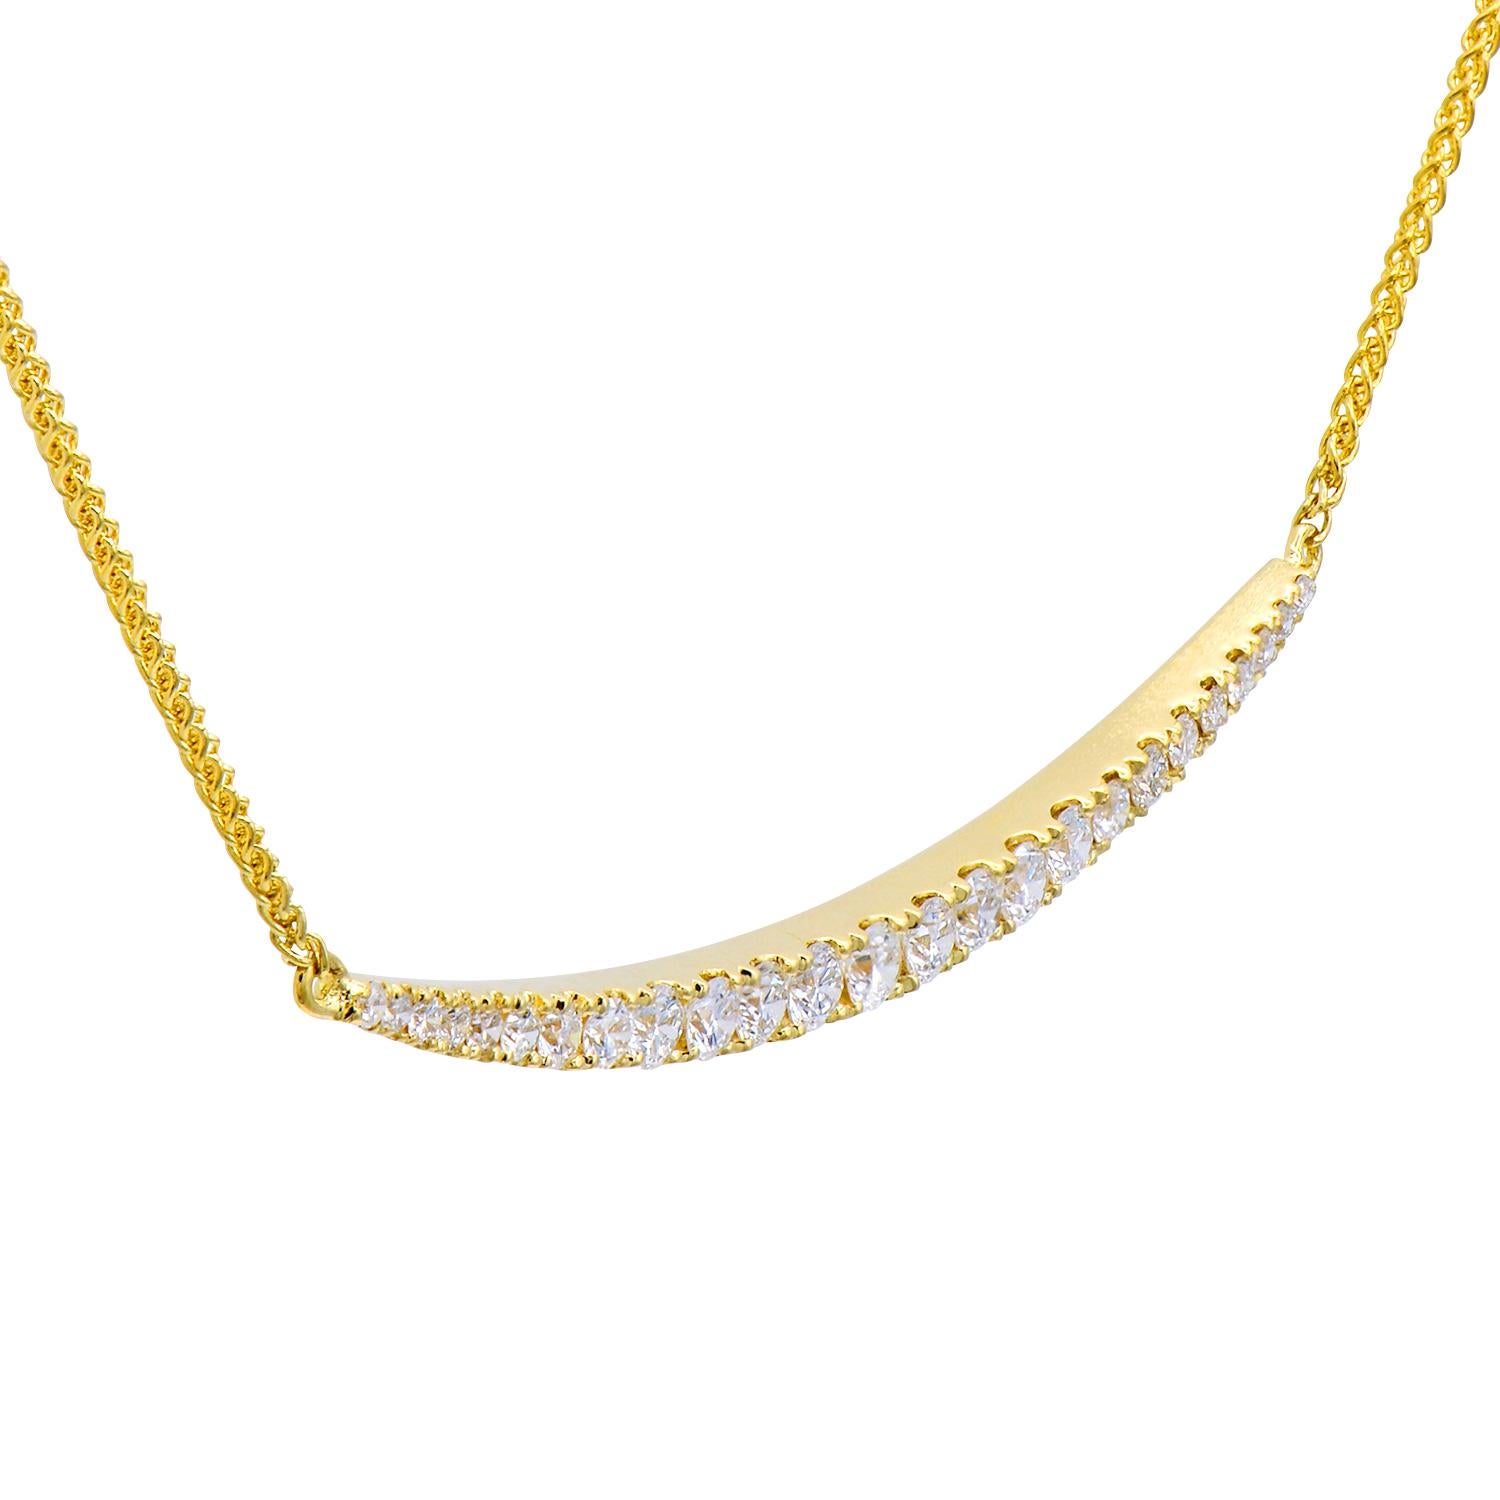 Add a smile to your face with this curved diamond row necklace that reminds you of a smile. The necklace is covered in 25 round VS2, G color diamonds totaling 0.47 carats and is attached to an 18-inch chain. The diamonds are set in 2.8 grams of 18